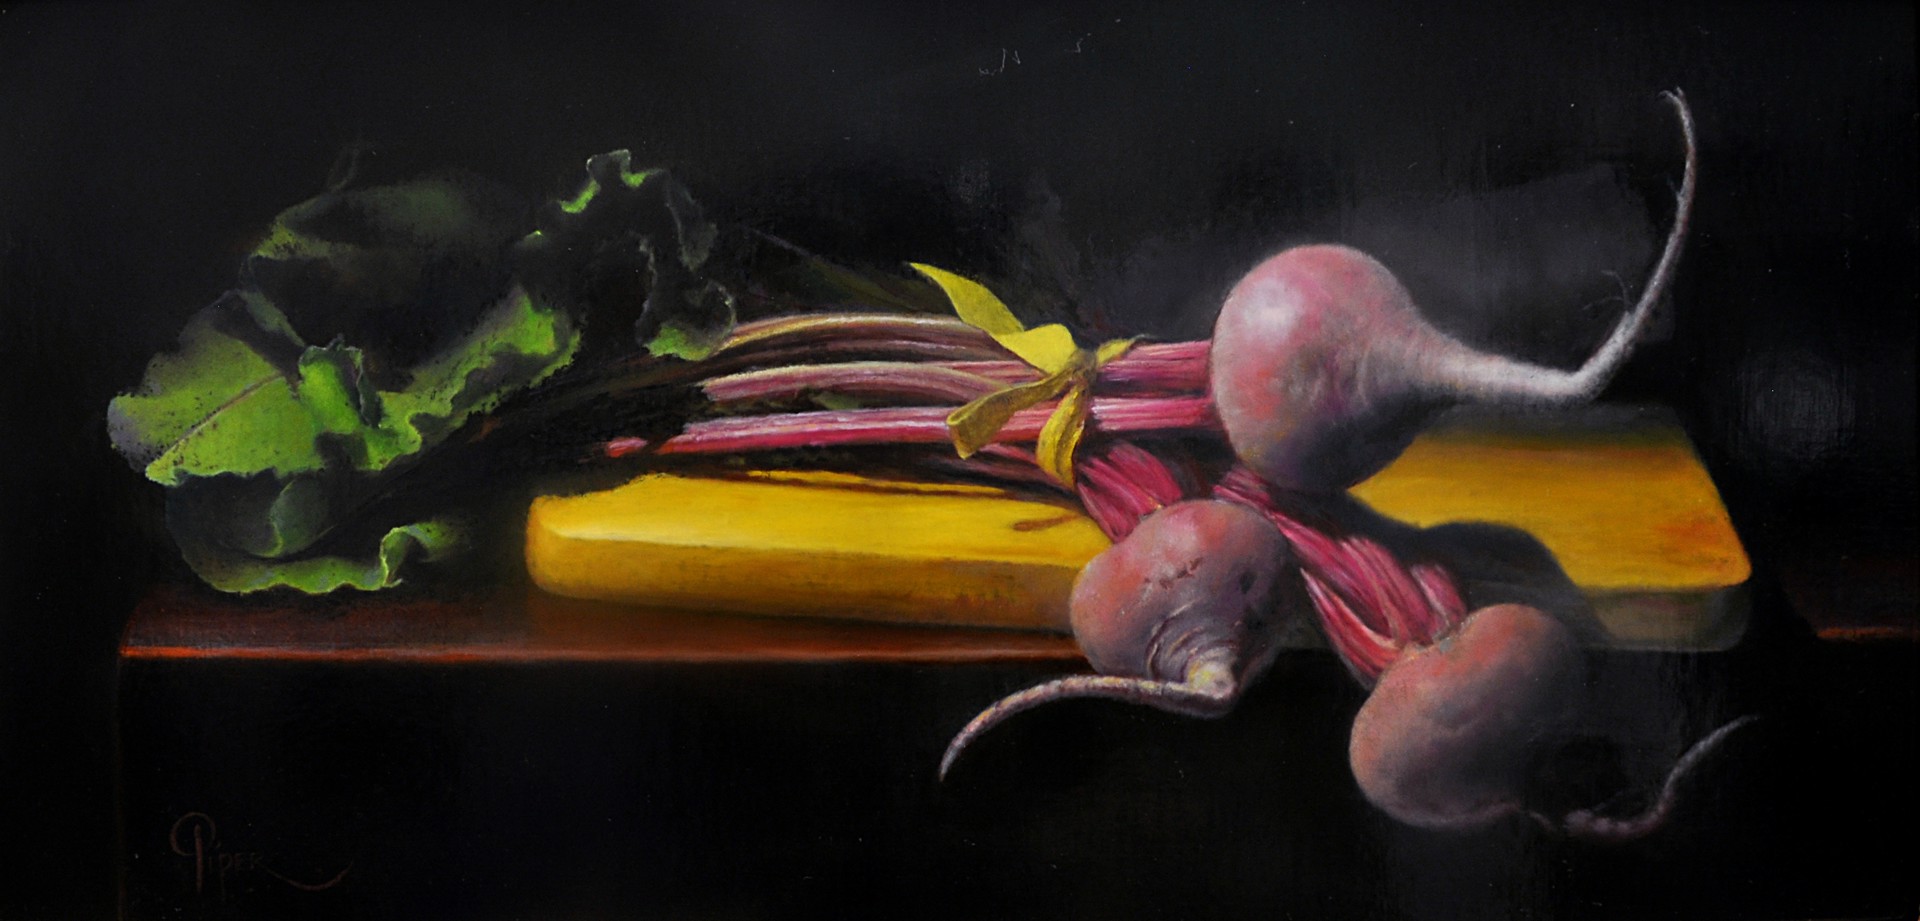 Beets - Locally Grown by Marsha Whitesides Piper